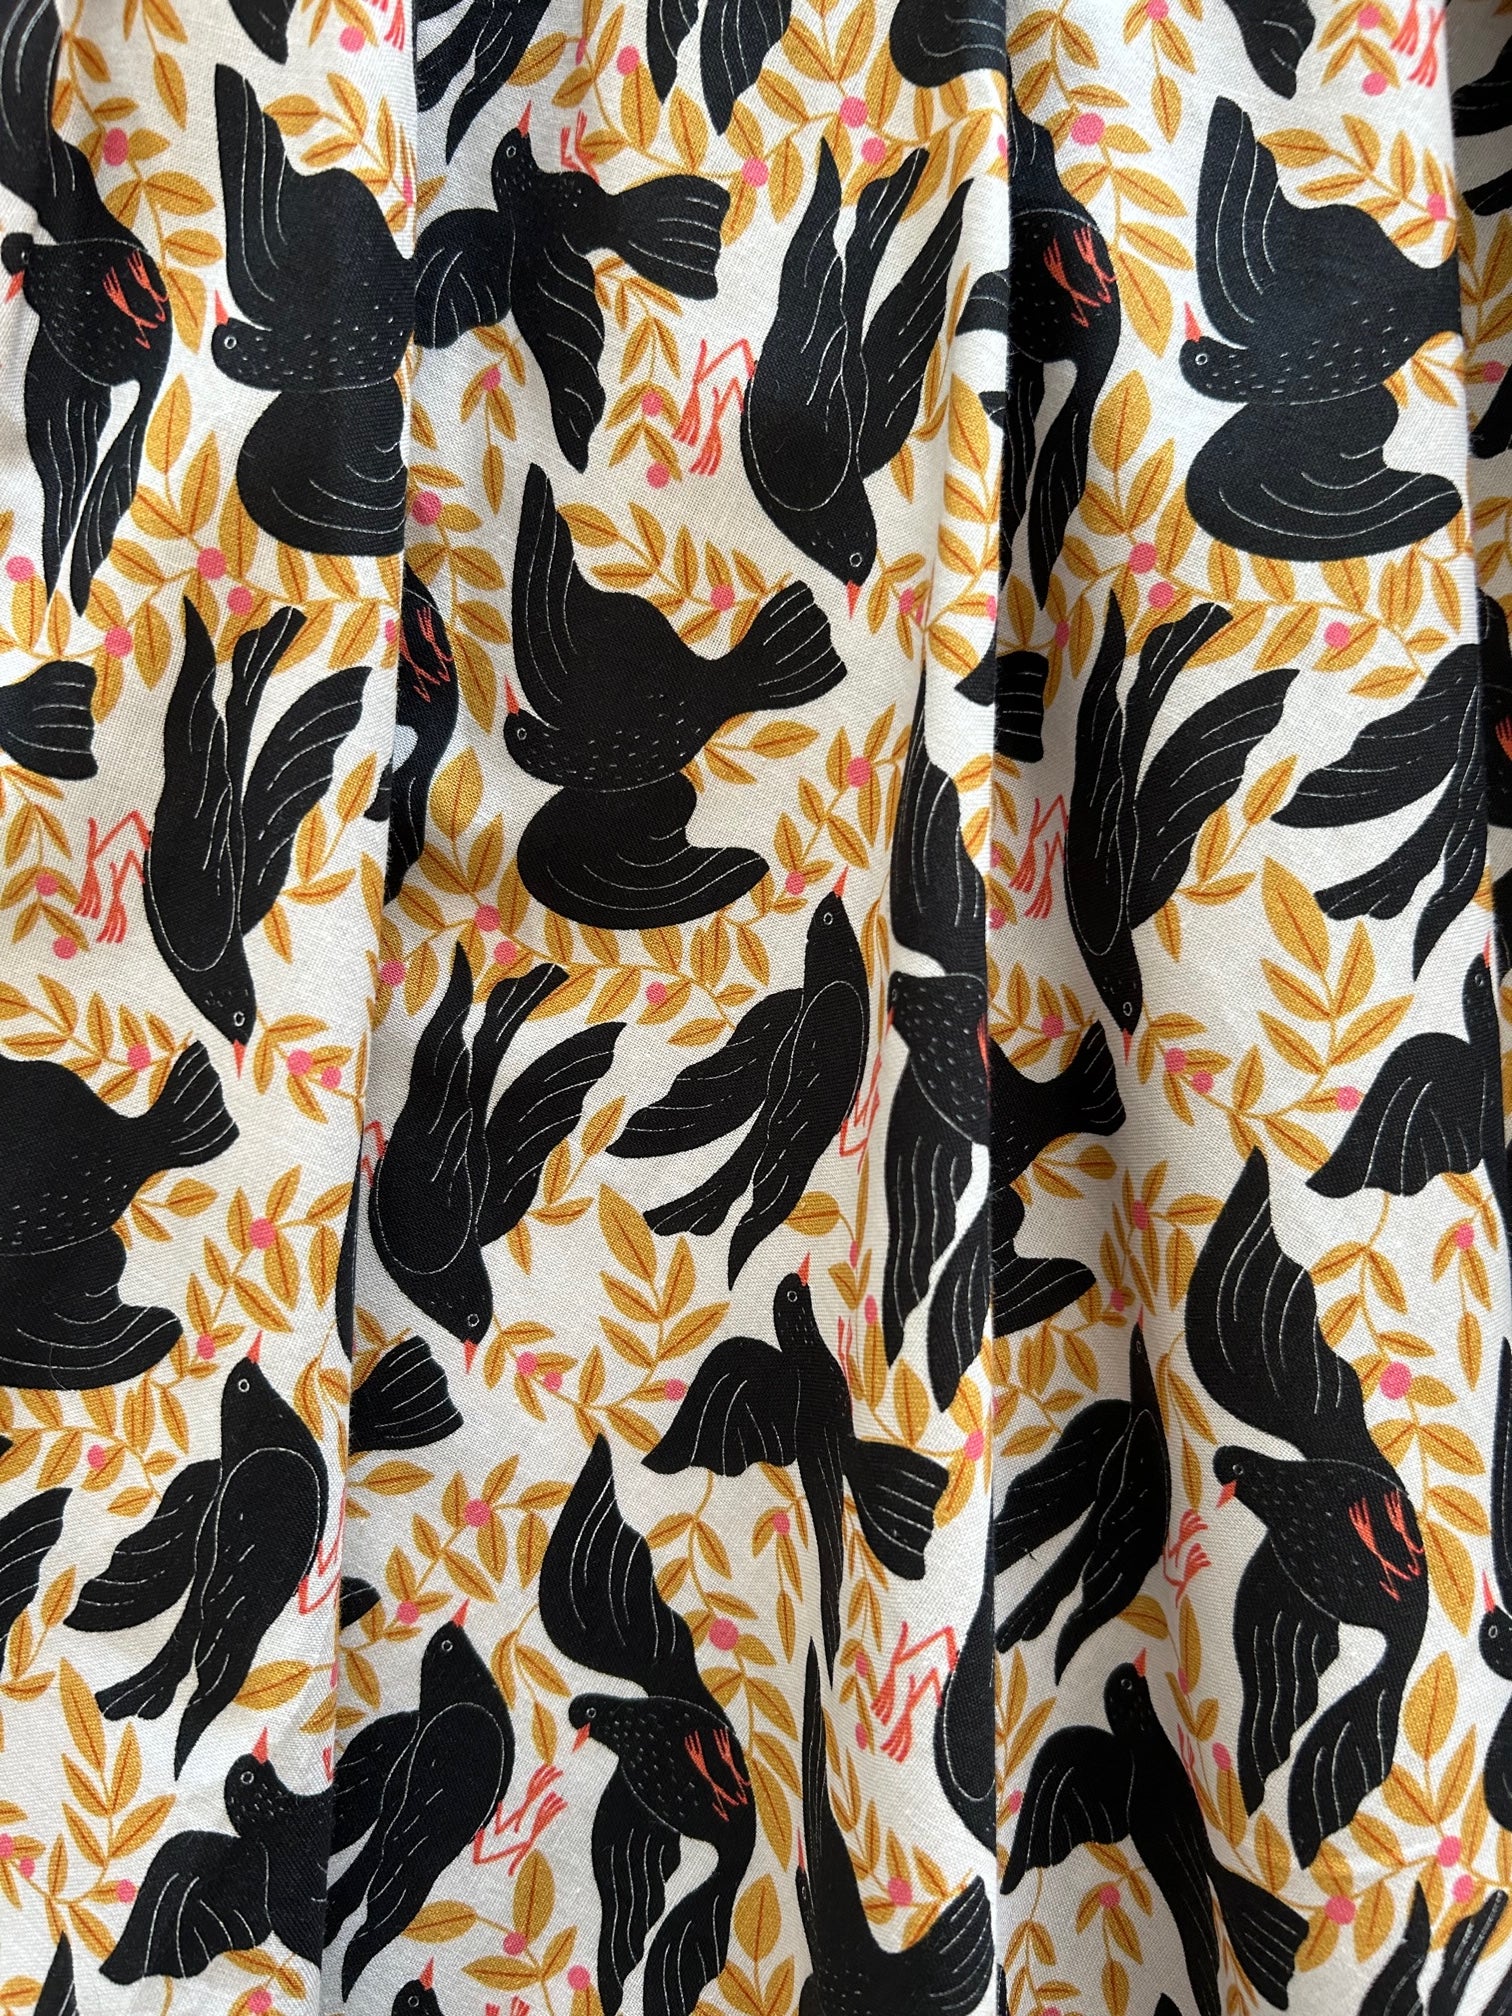 closeu up of the fabric showing the black birds and mustard leaves